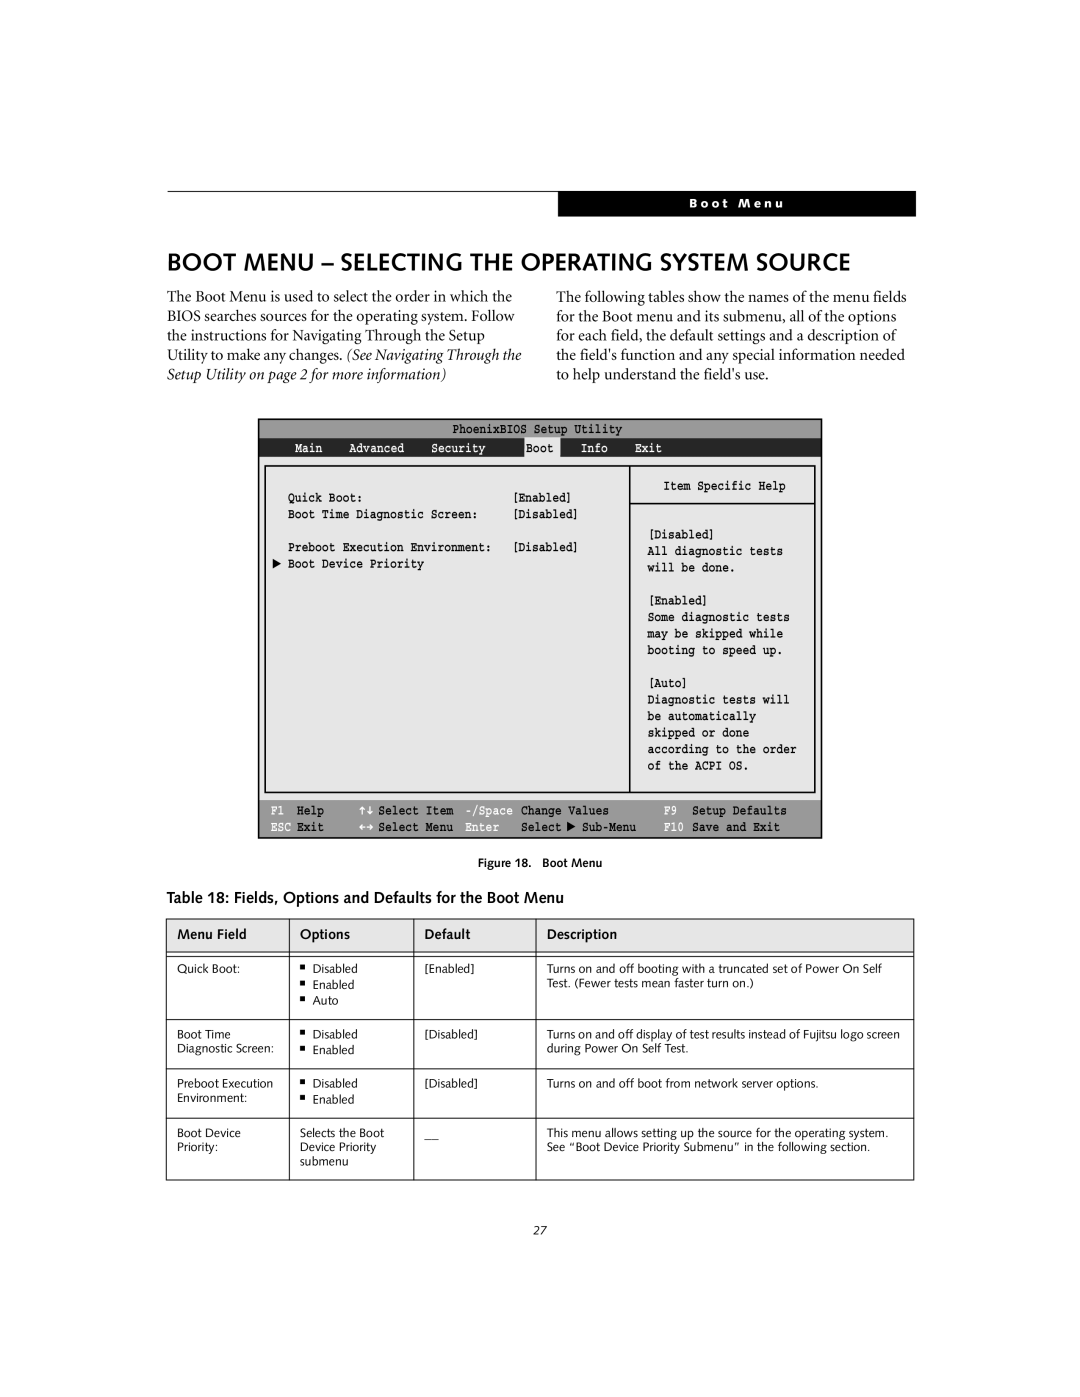 Fujitsu S6110 Boot Menu - Selecting The Operating System Source, Fields, Options and Defaults for the Boot Menu, Main 